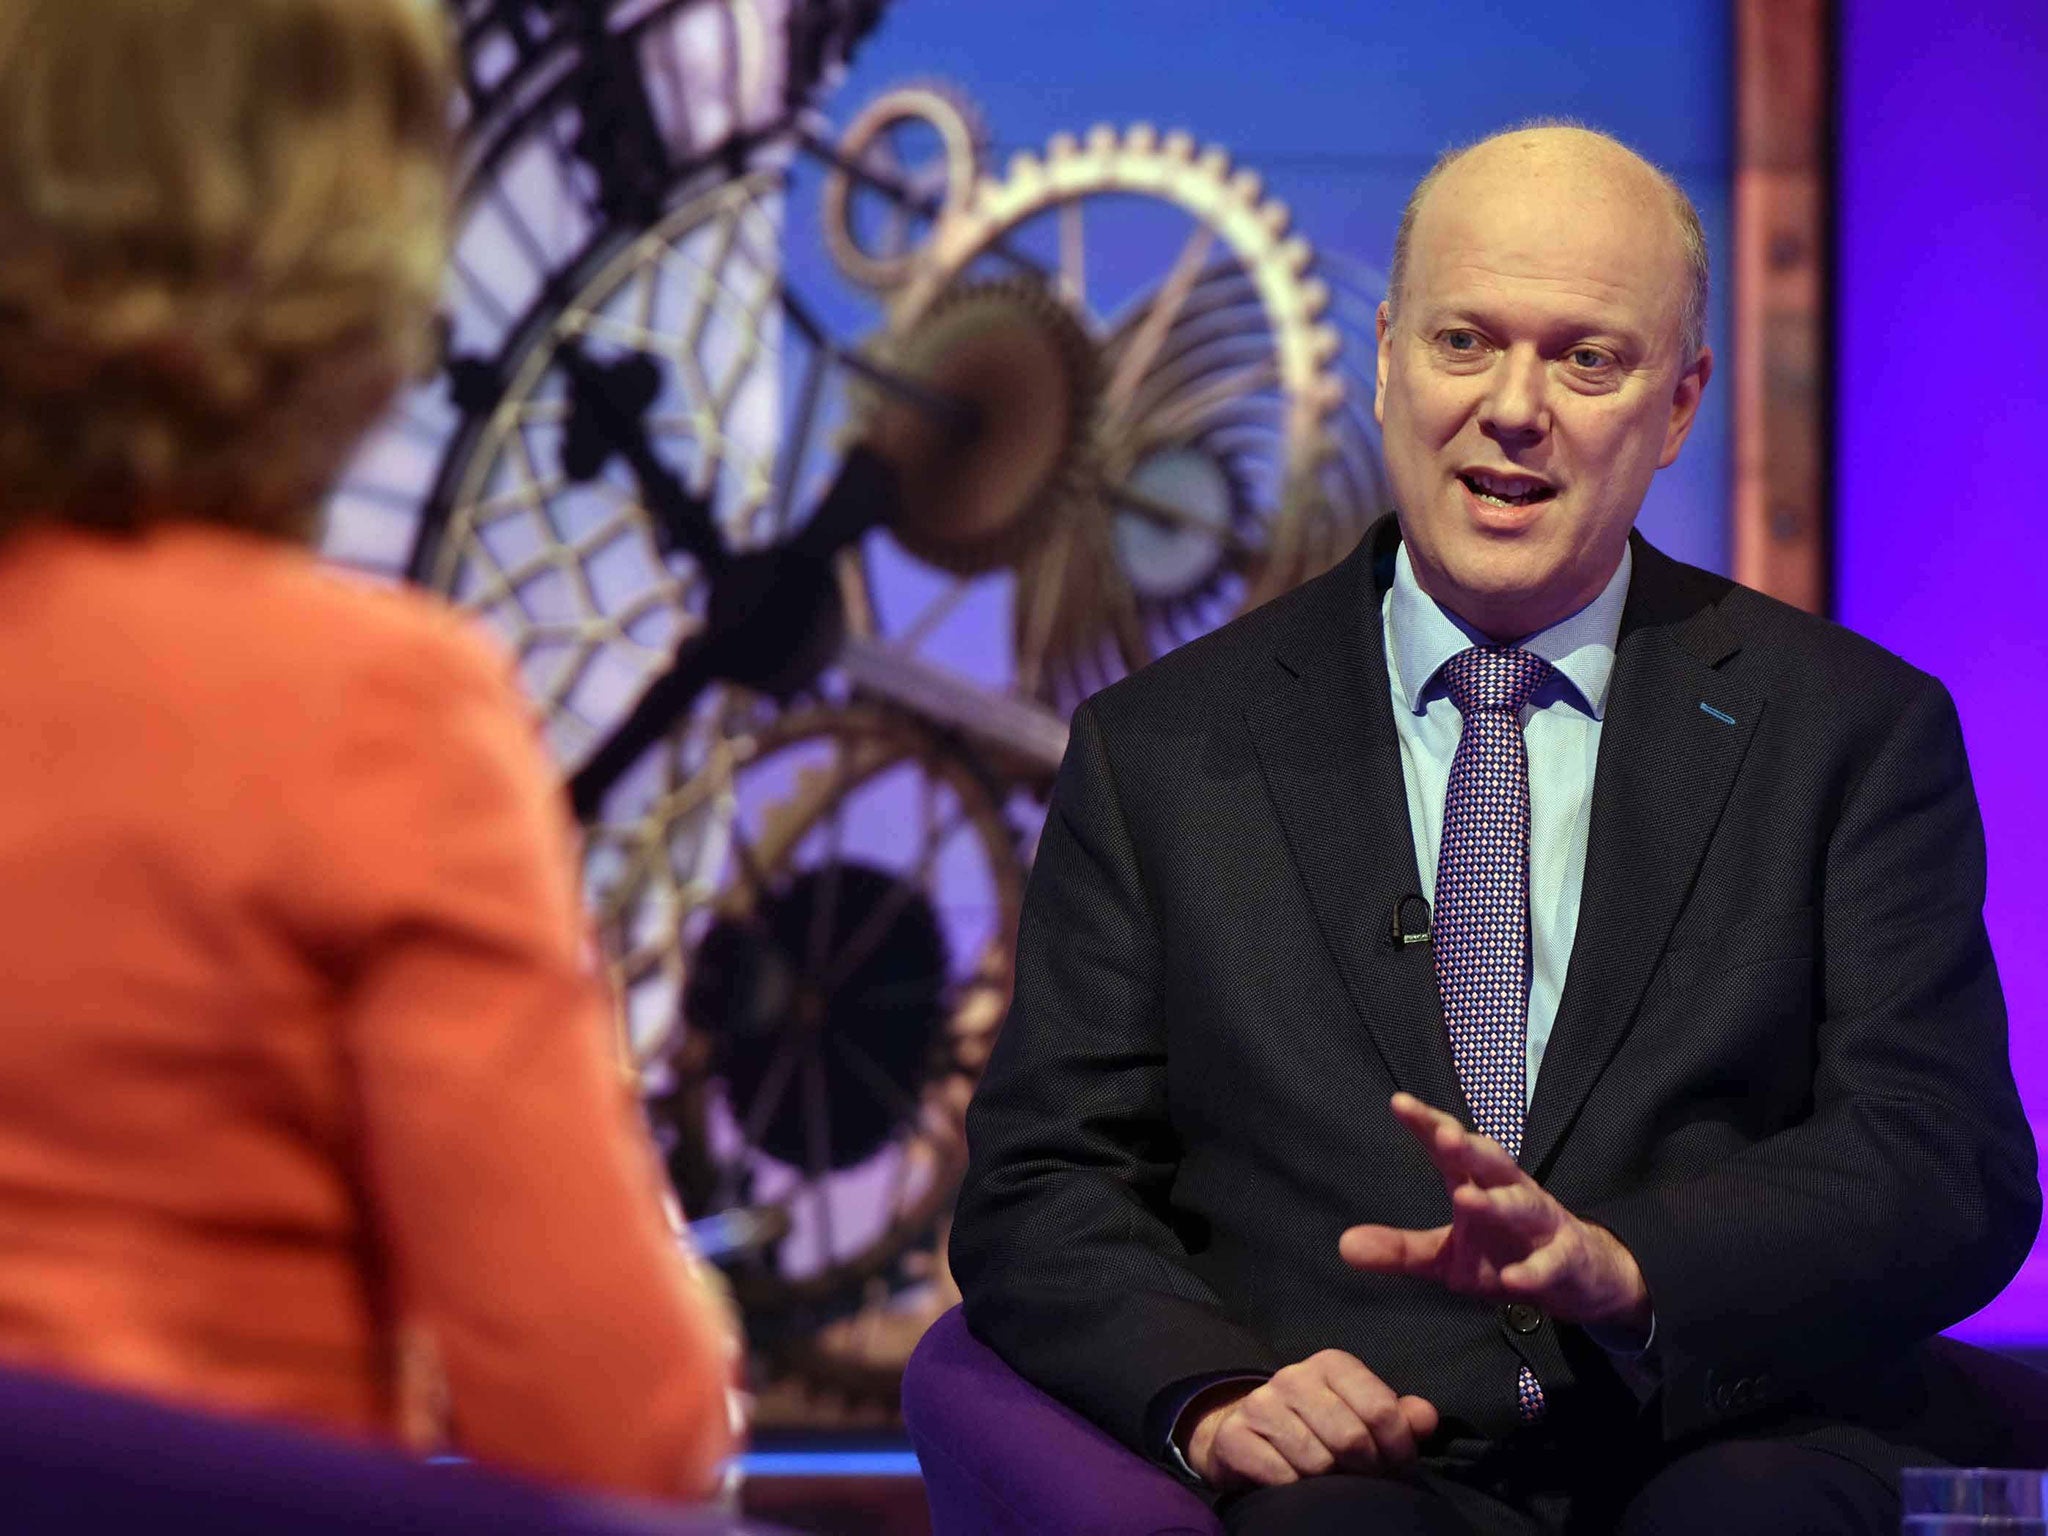 Chris Grayling on BBC1’s ‘Sunday Politics’ programme, where he dismissed fears that Britain’s trade with Europe would suffer